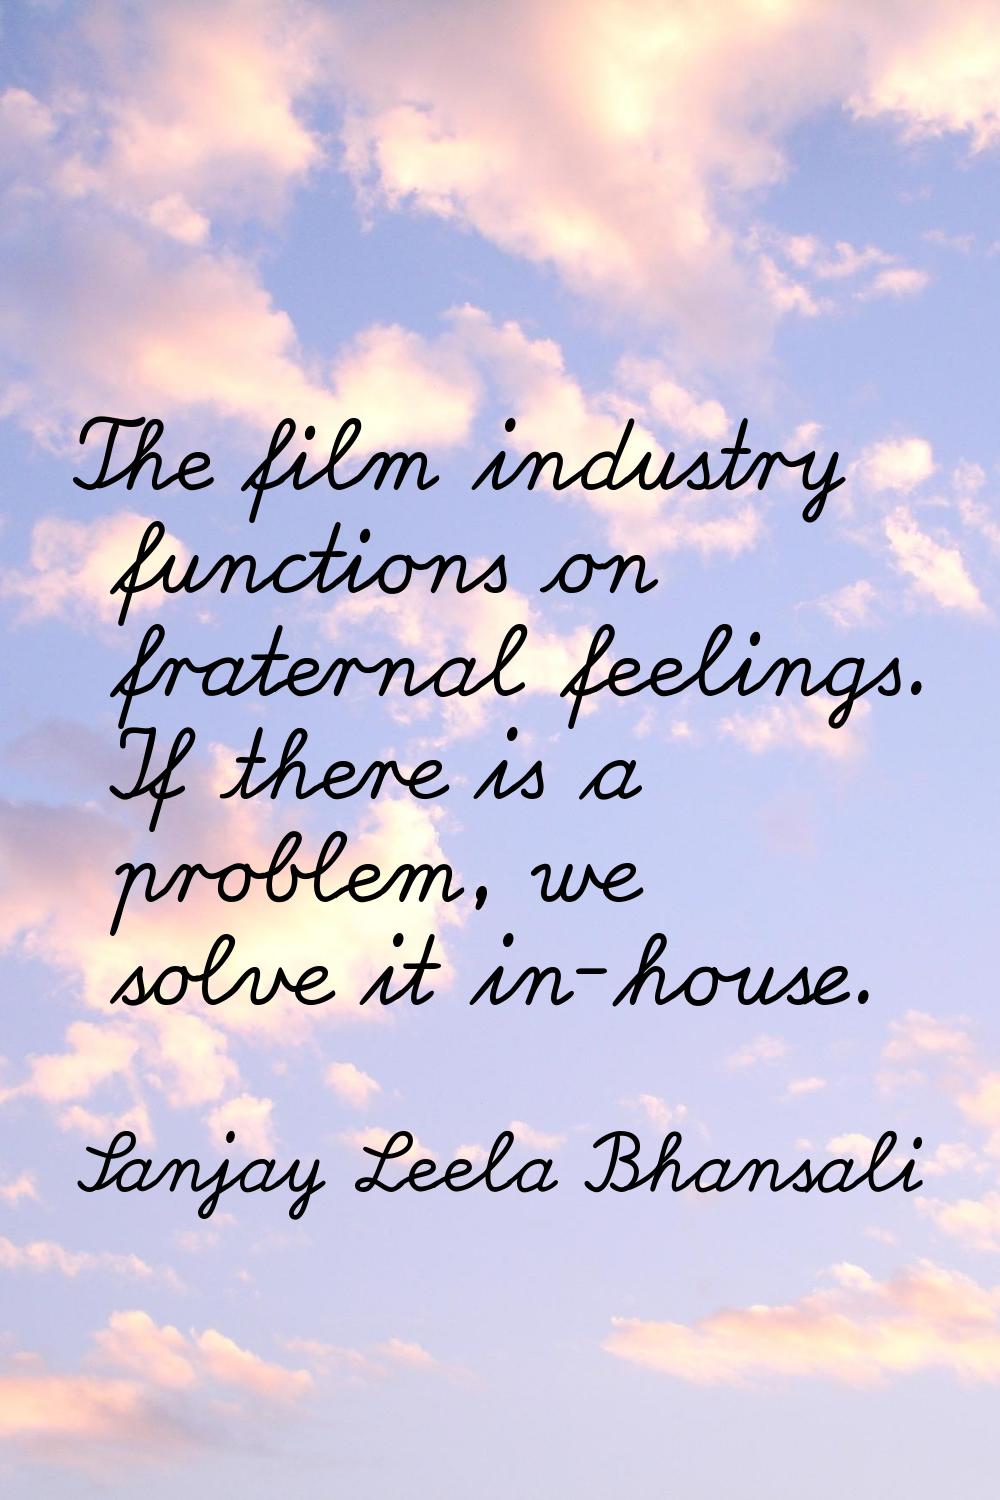 The film industry functions on fraternal feelings. If there is a problem, we solve it in-house.